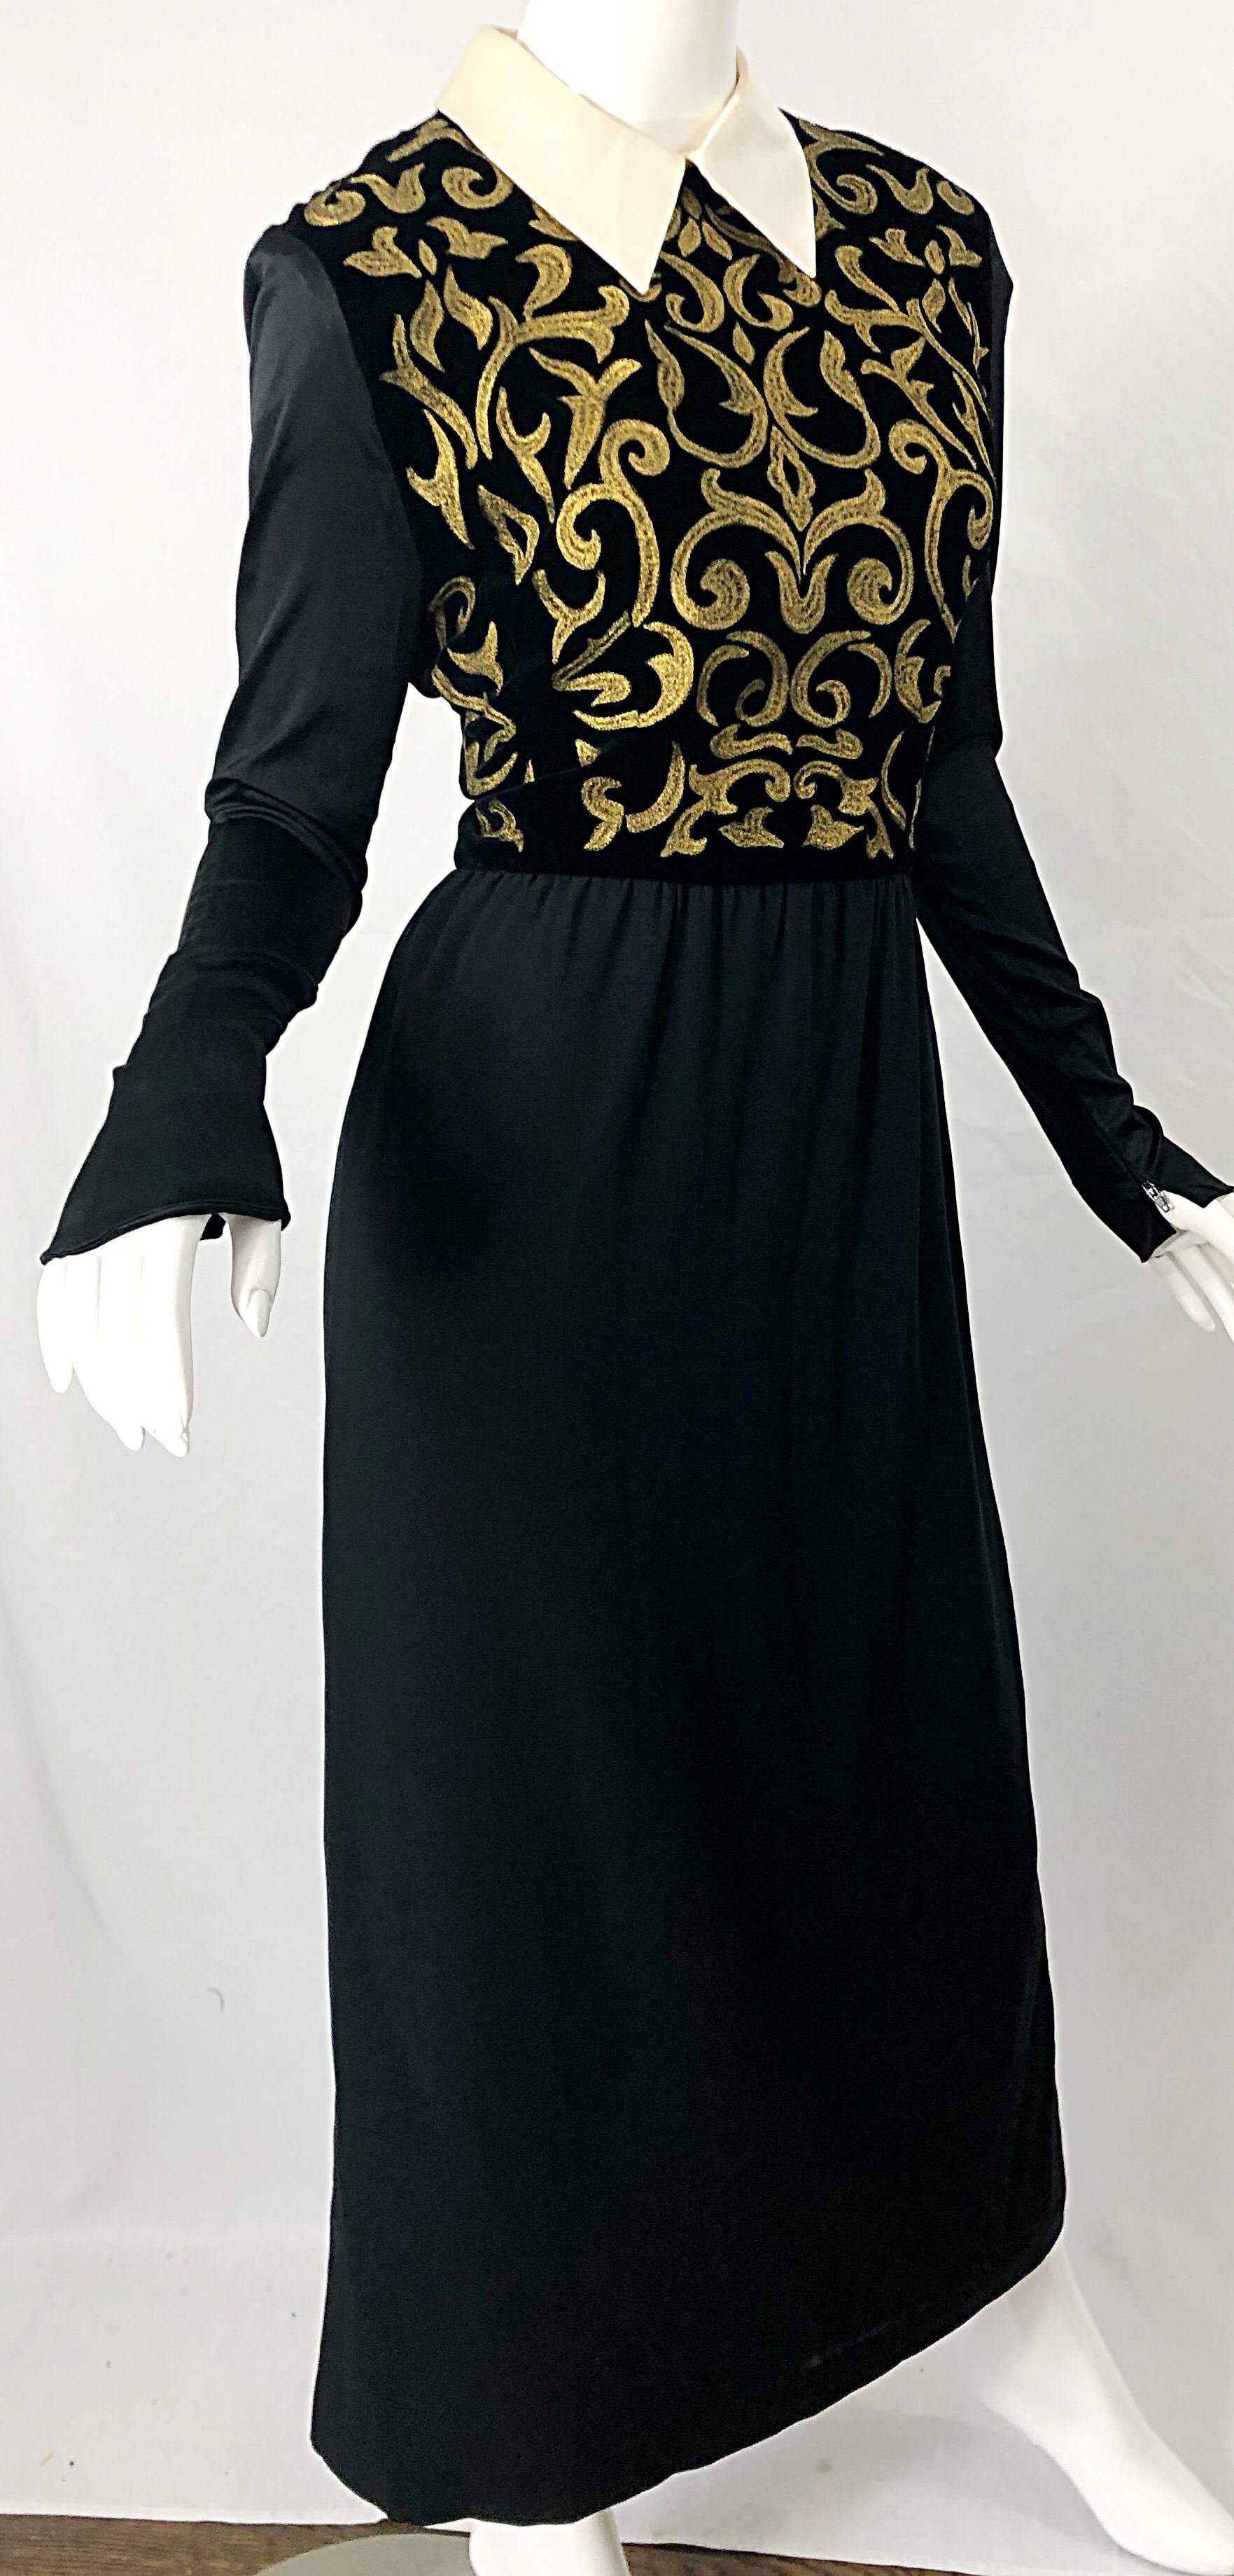 Karl Lagerfeld Runway Fall 1988 Black Gold Embroidered Vintage 80s Gown Dress For Sale 1